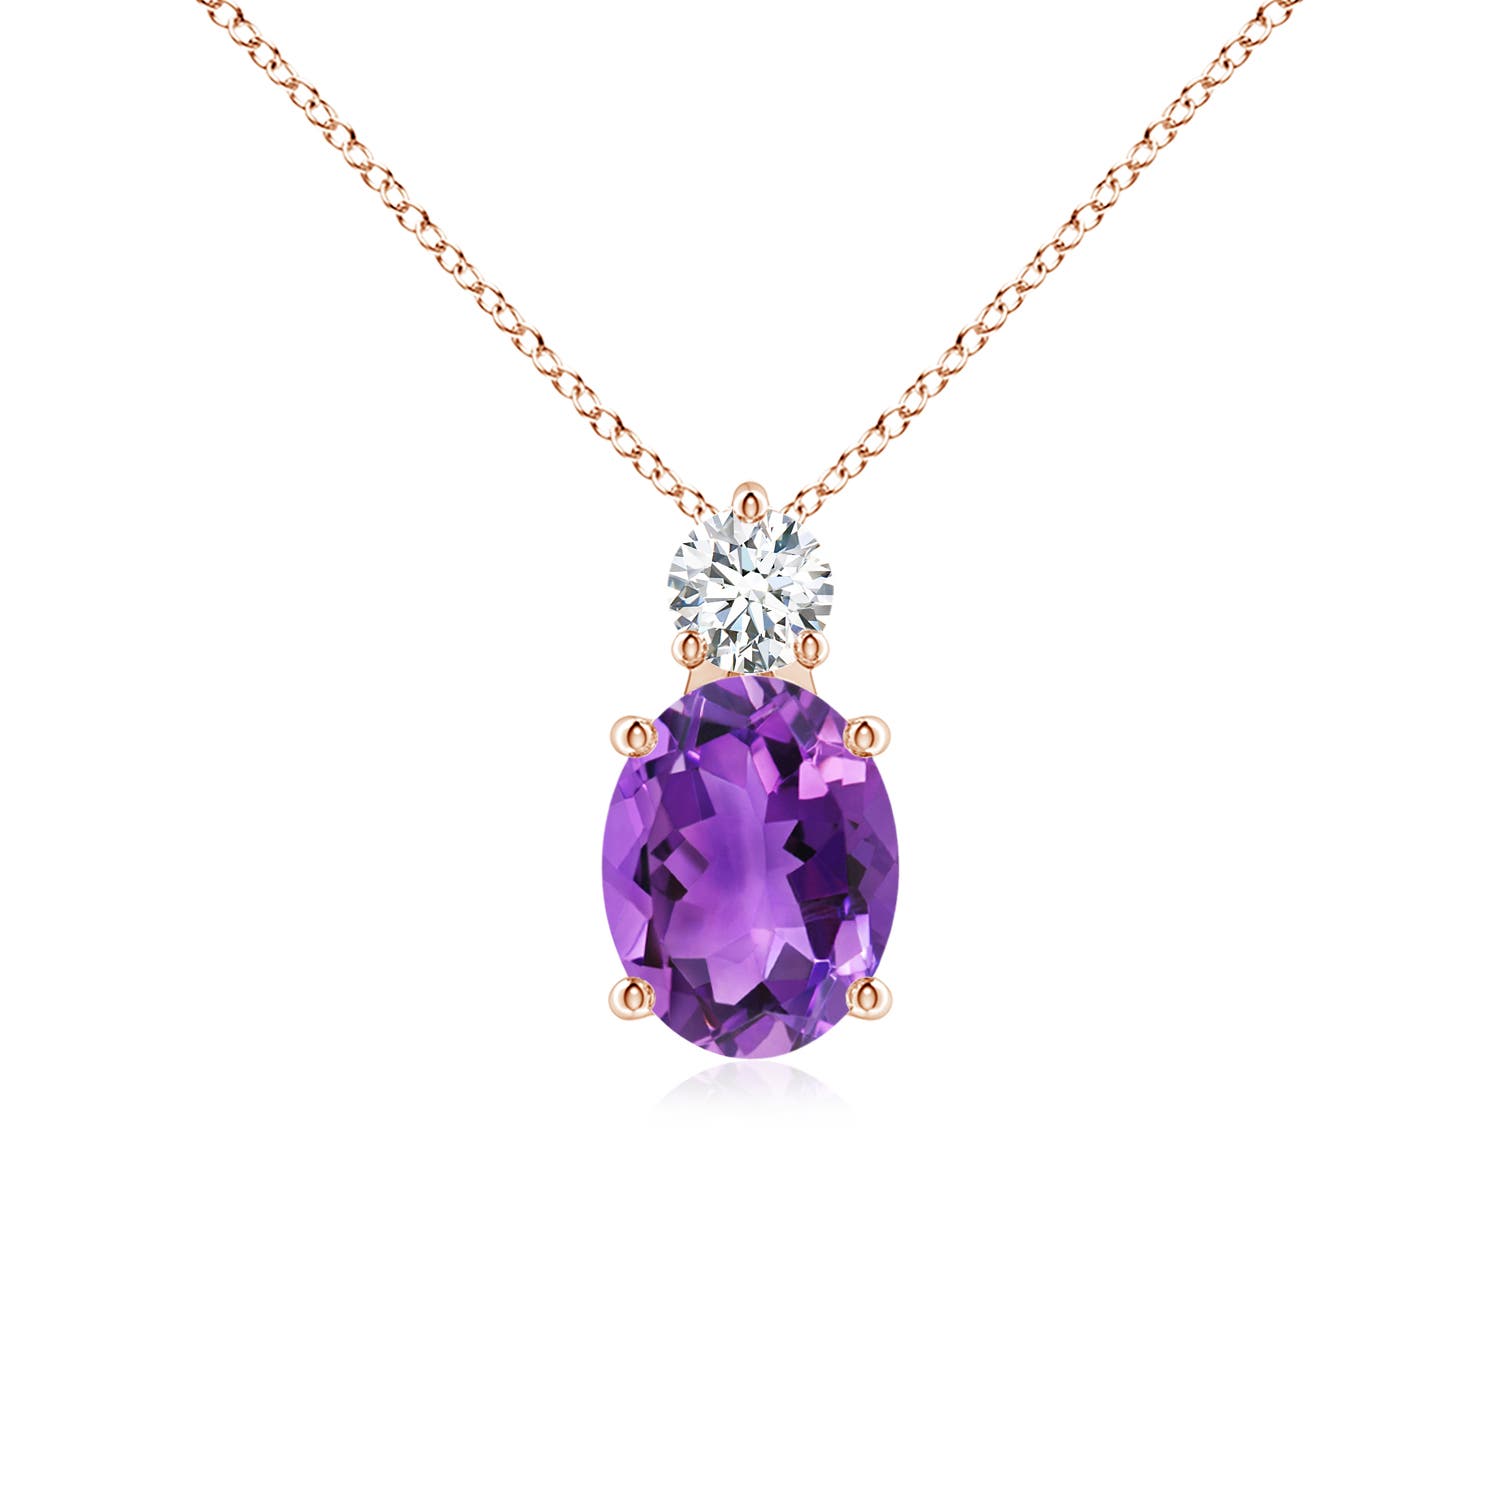 AAA - Amethyst / 1.83 CT / 14 KT Rose Gold